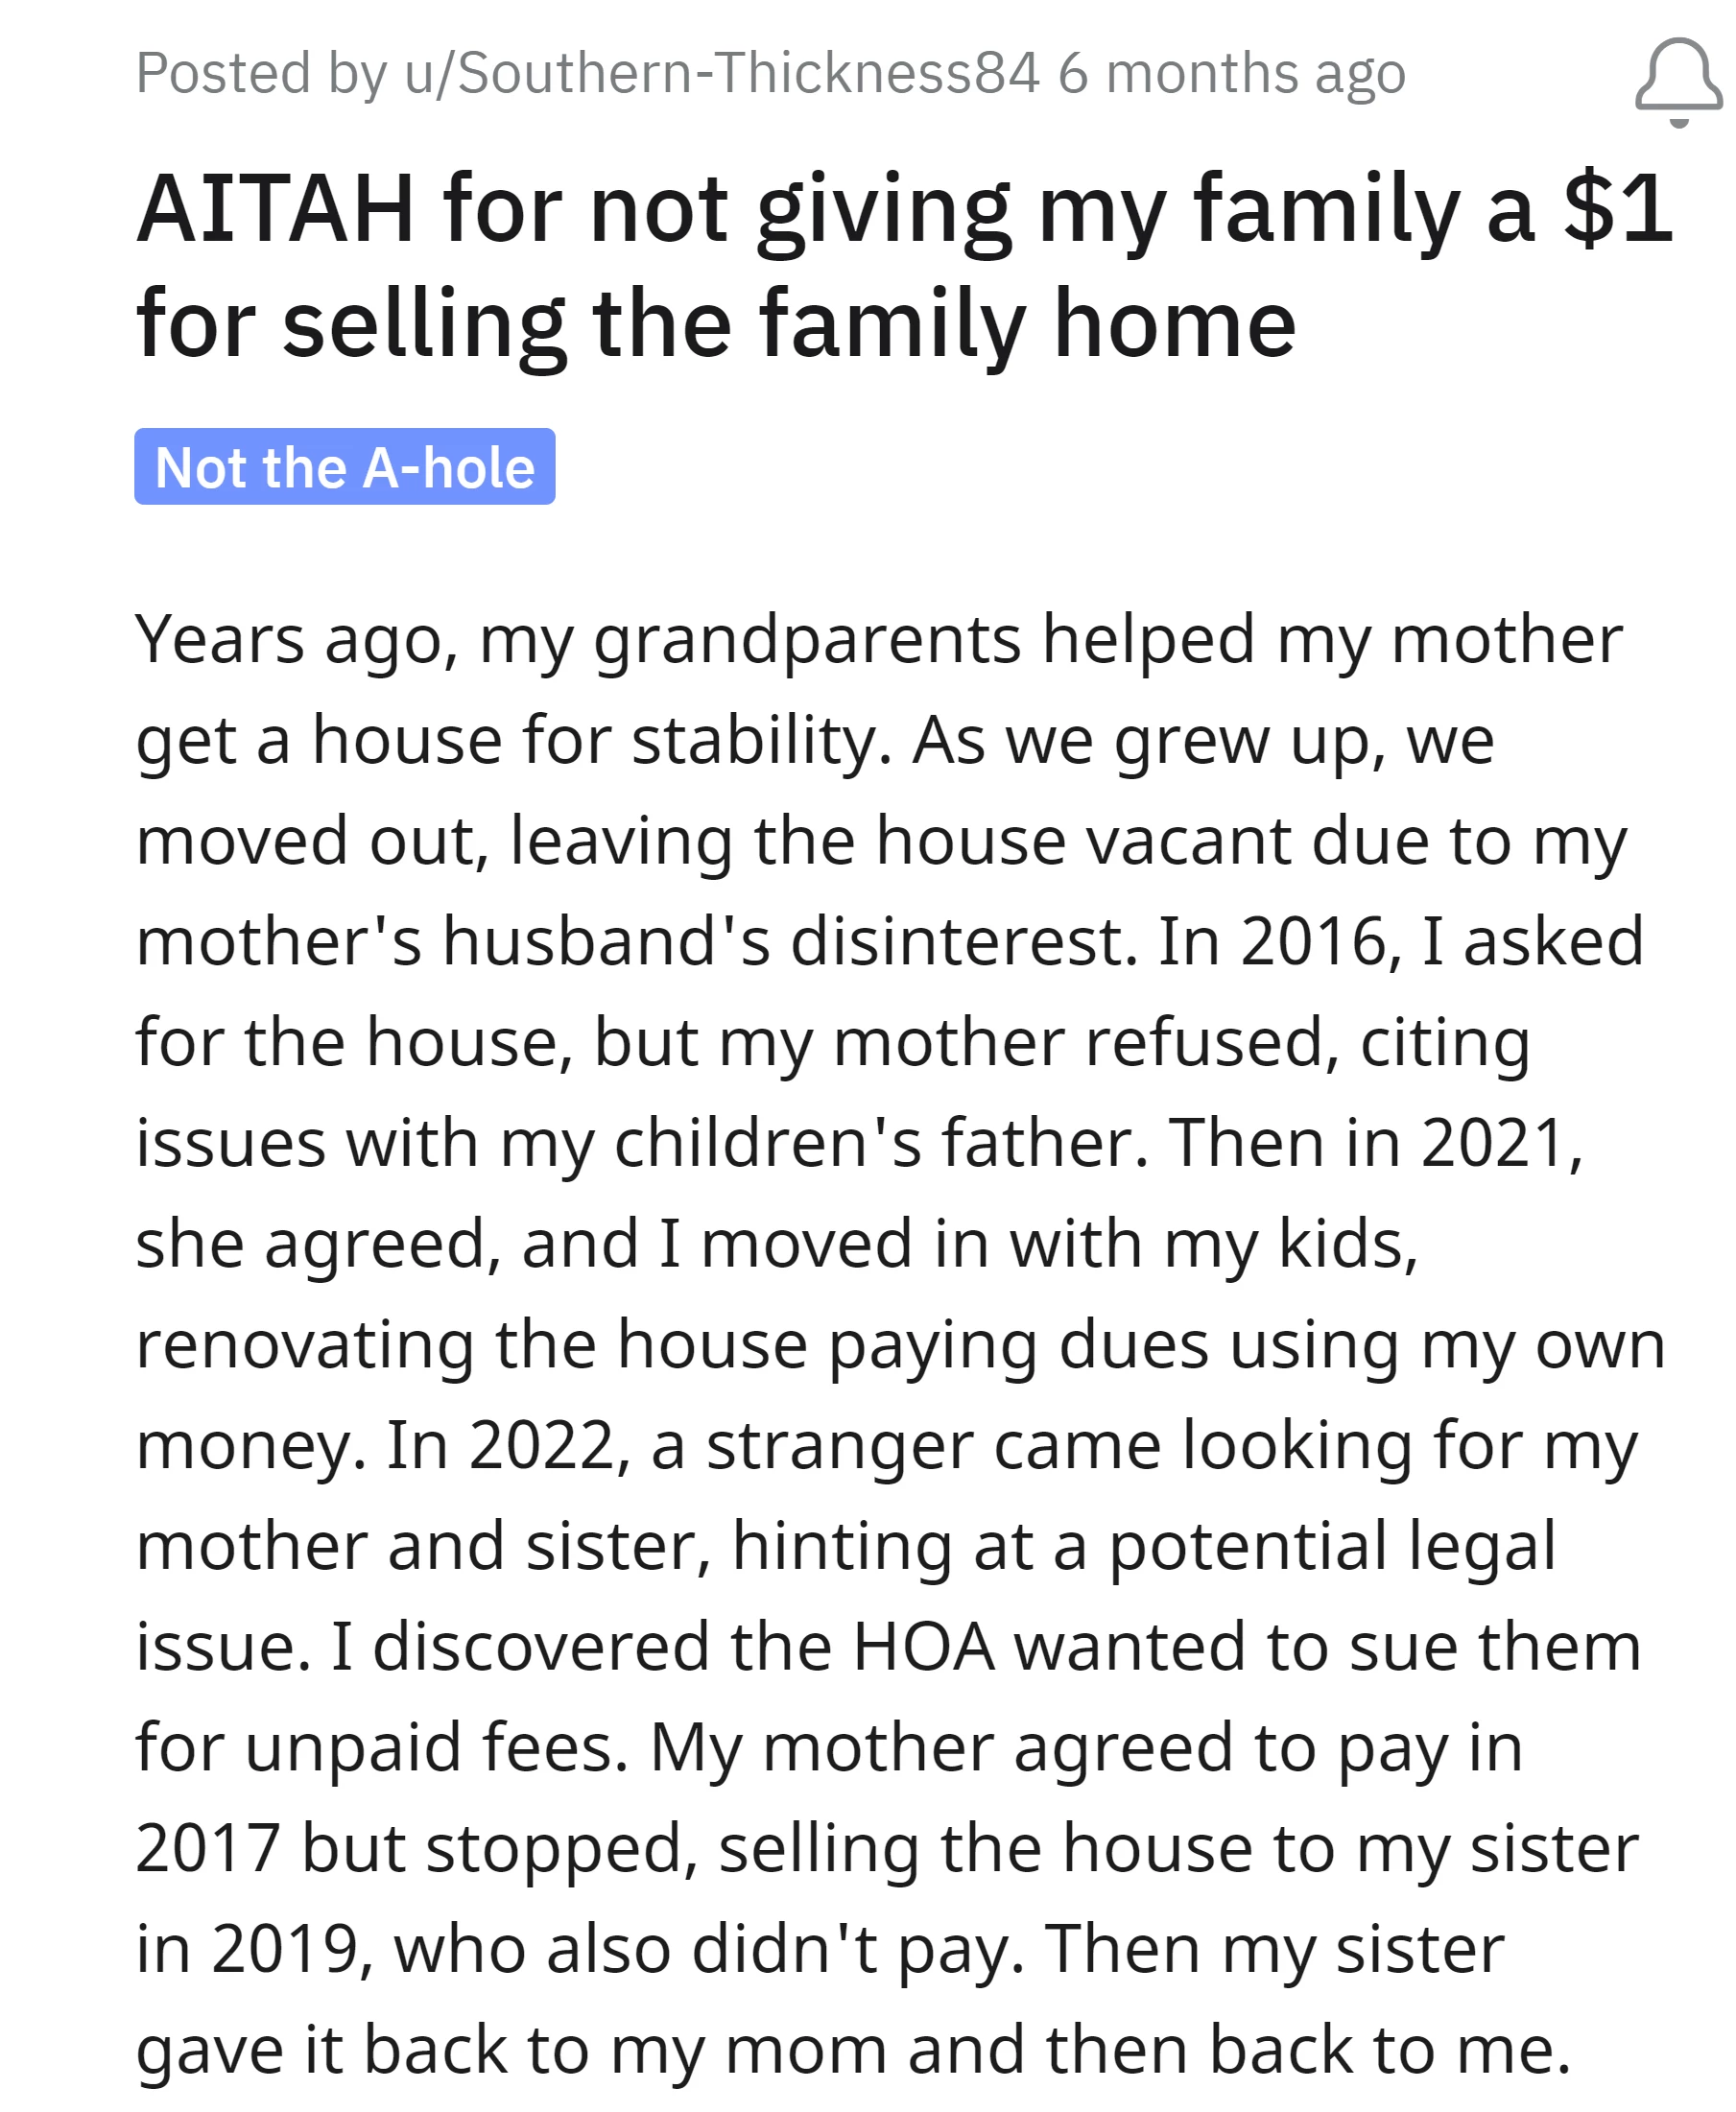 OP's grandparents helped their mother get a house years ago